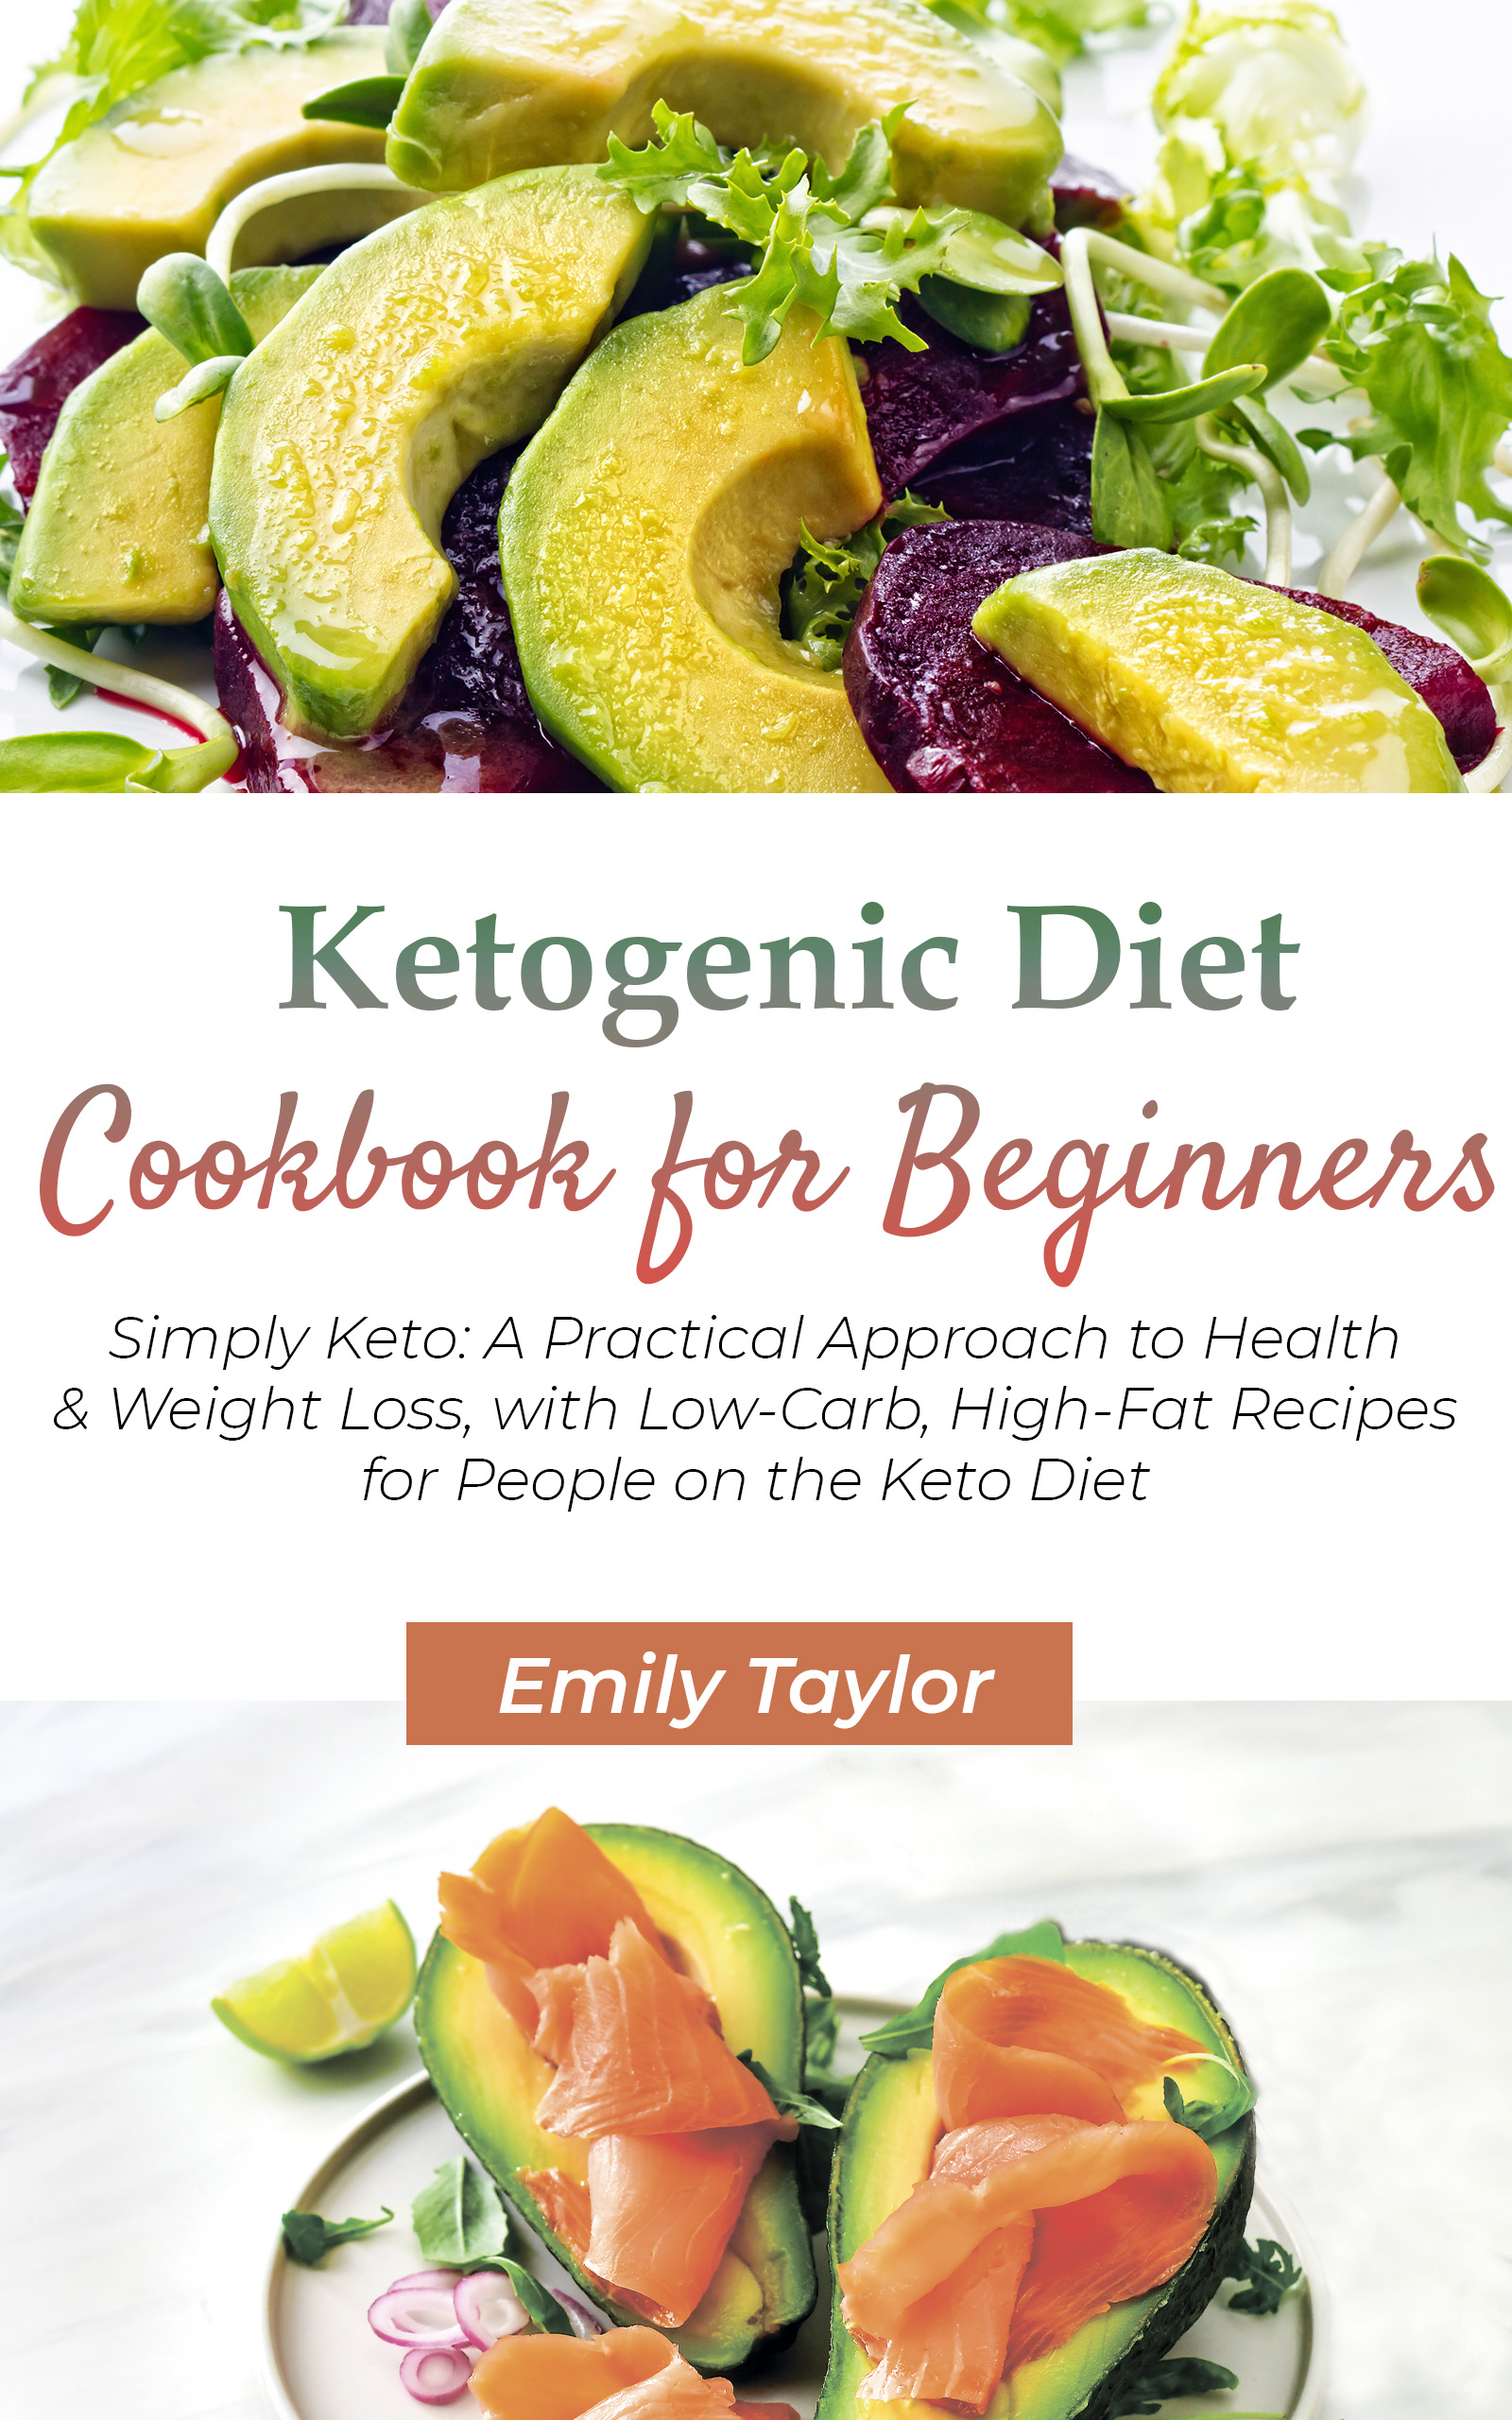 FREE: Ketogenic Diet Cookbook for Beginners: Simply Keto: A Practical Approach to Health & Weight Loss, with Low-Carb, High-Fat Recipes for People on the Keto Diet by Emily Taylor